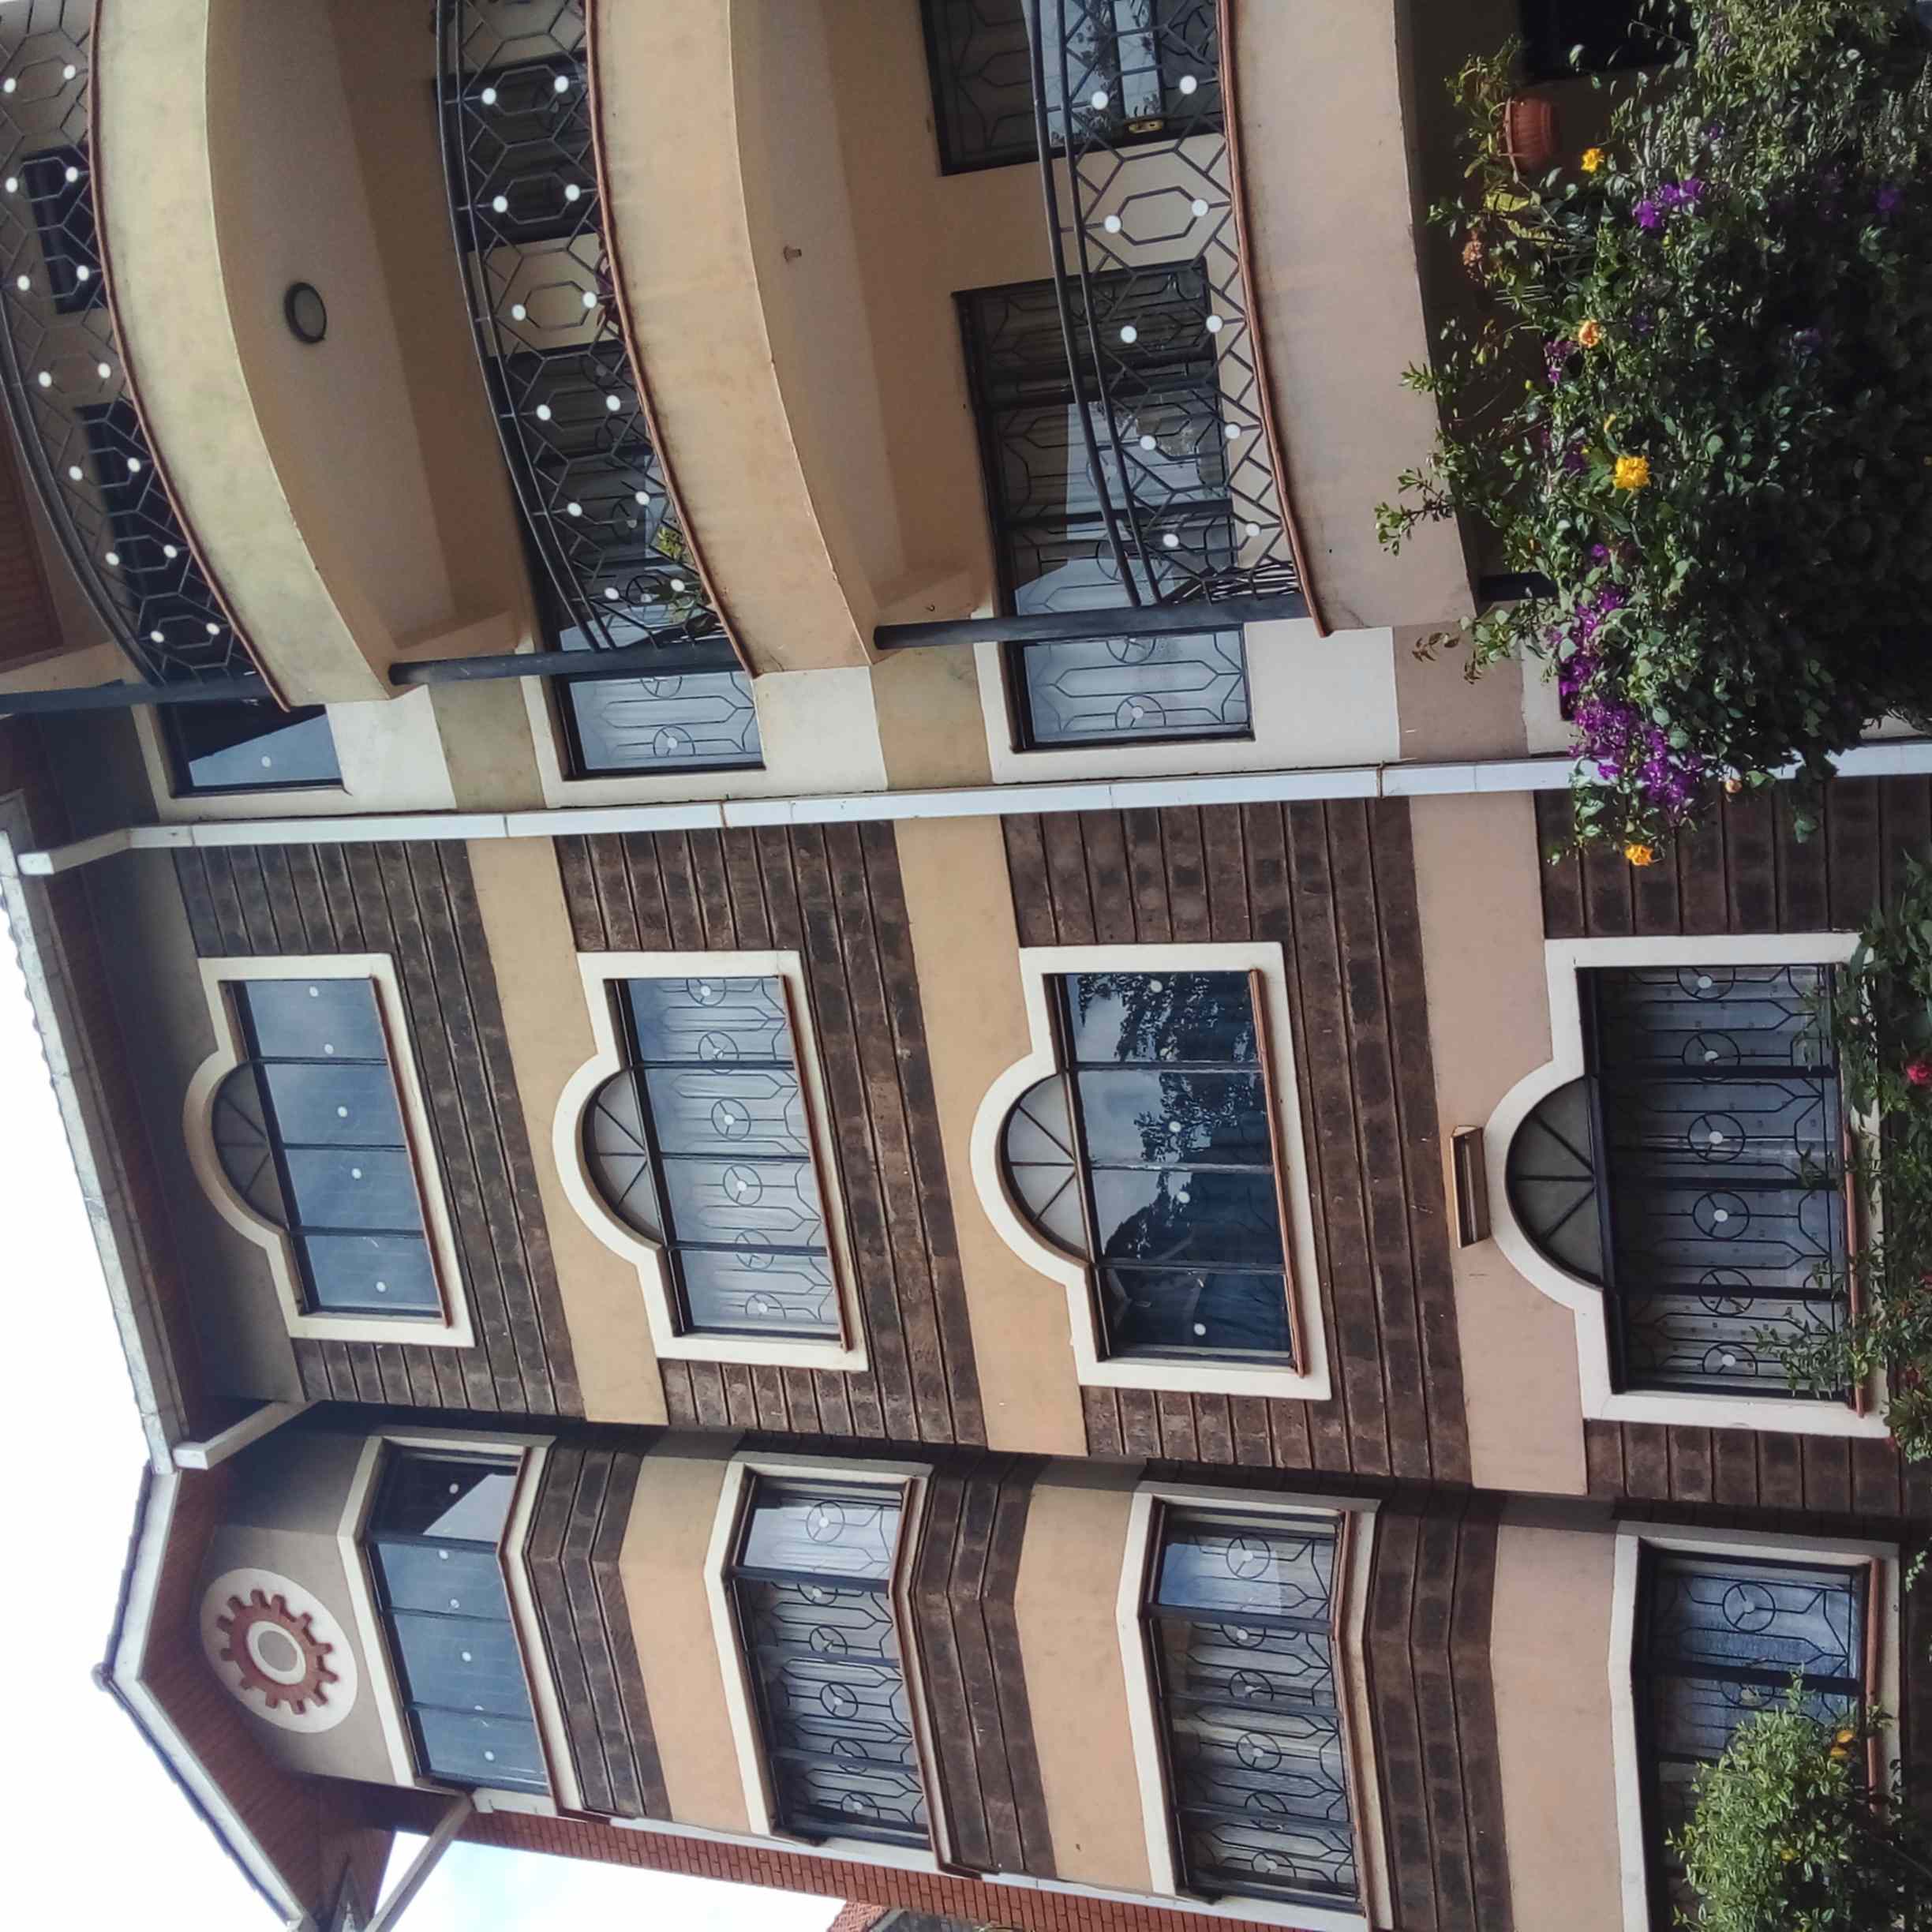 Magnificent 3 bedrooms Apartment in Riverside Drive , Nairobi City.